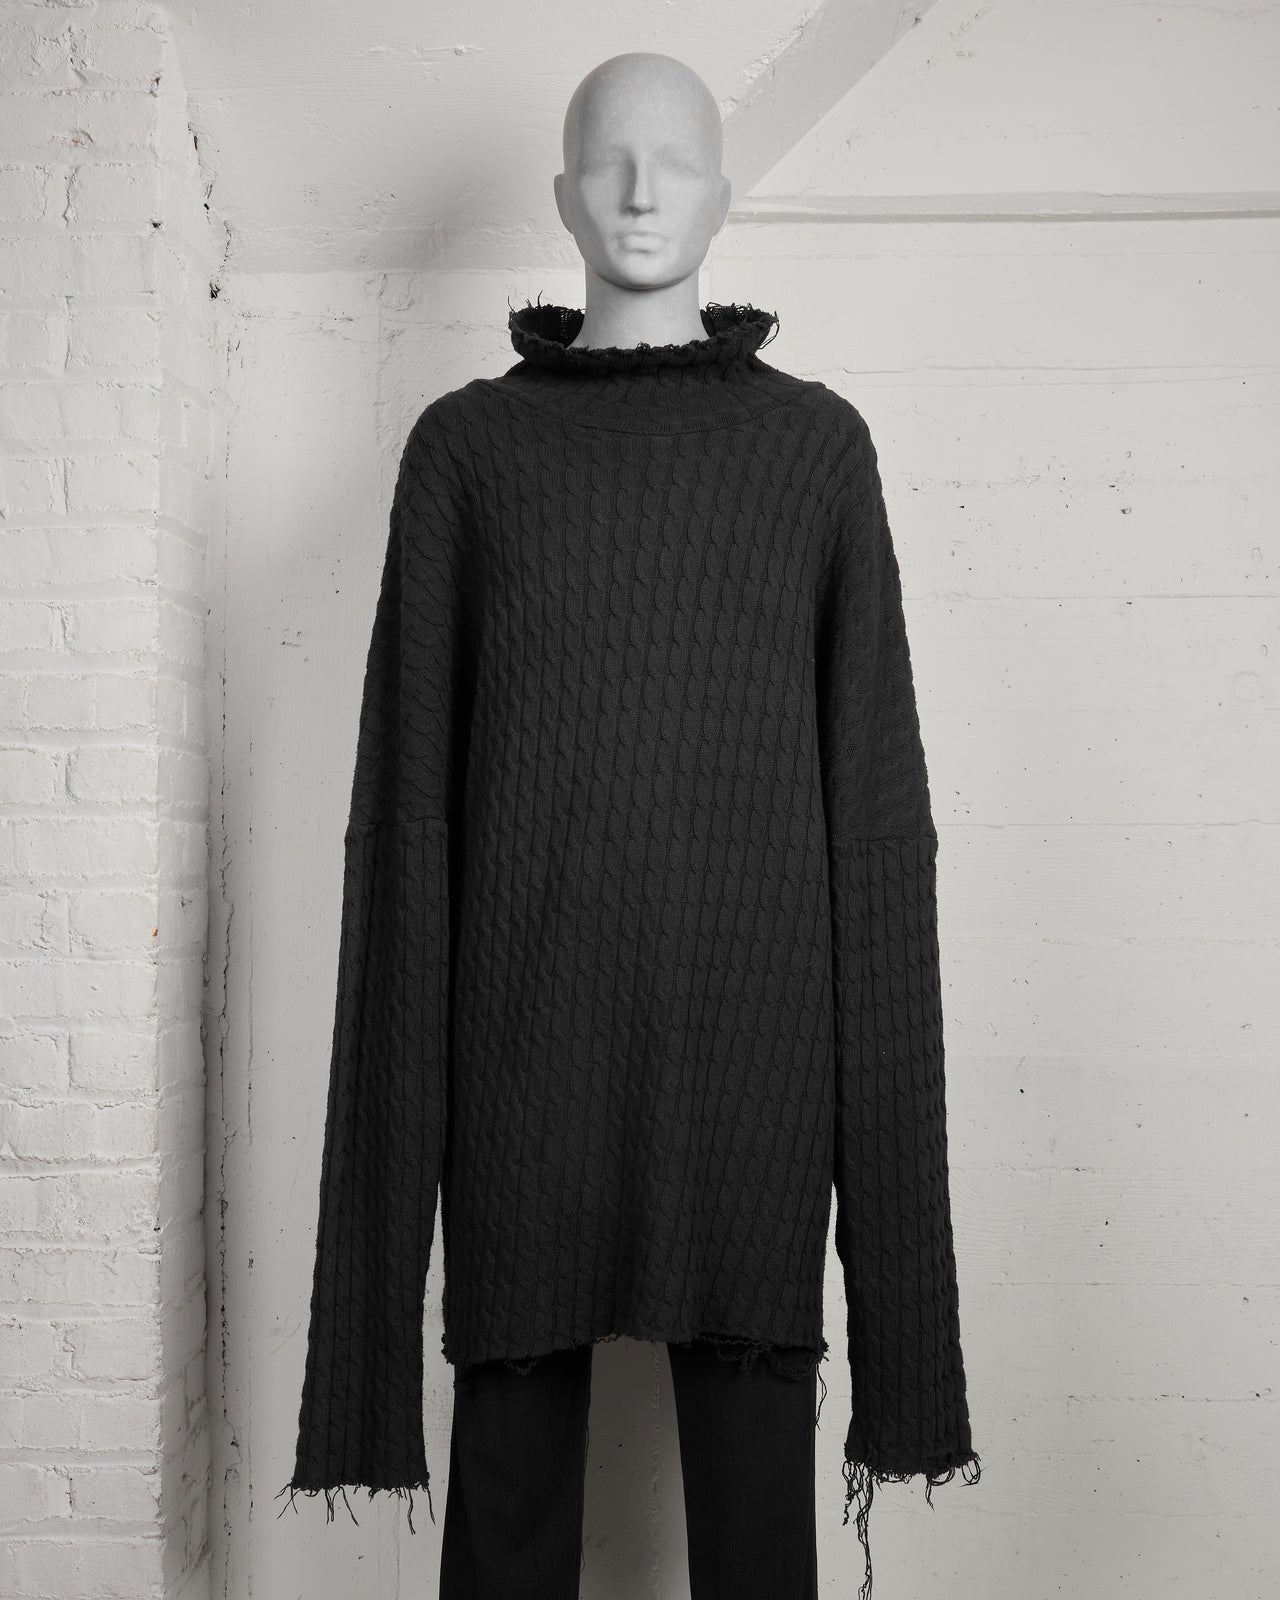 Raf Simons Oversized Cable-Knit Sweater- AW02 “Virginia Creeper”